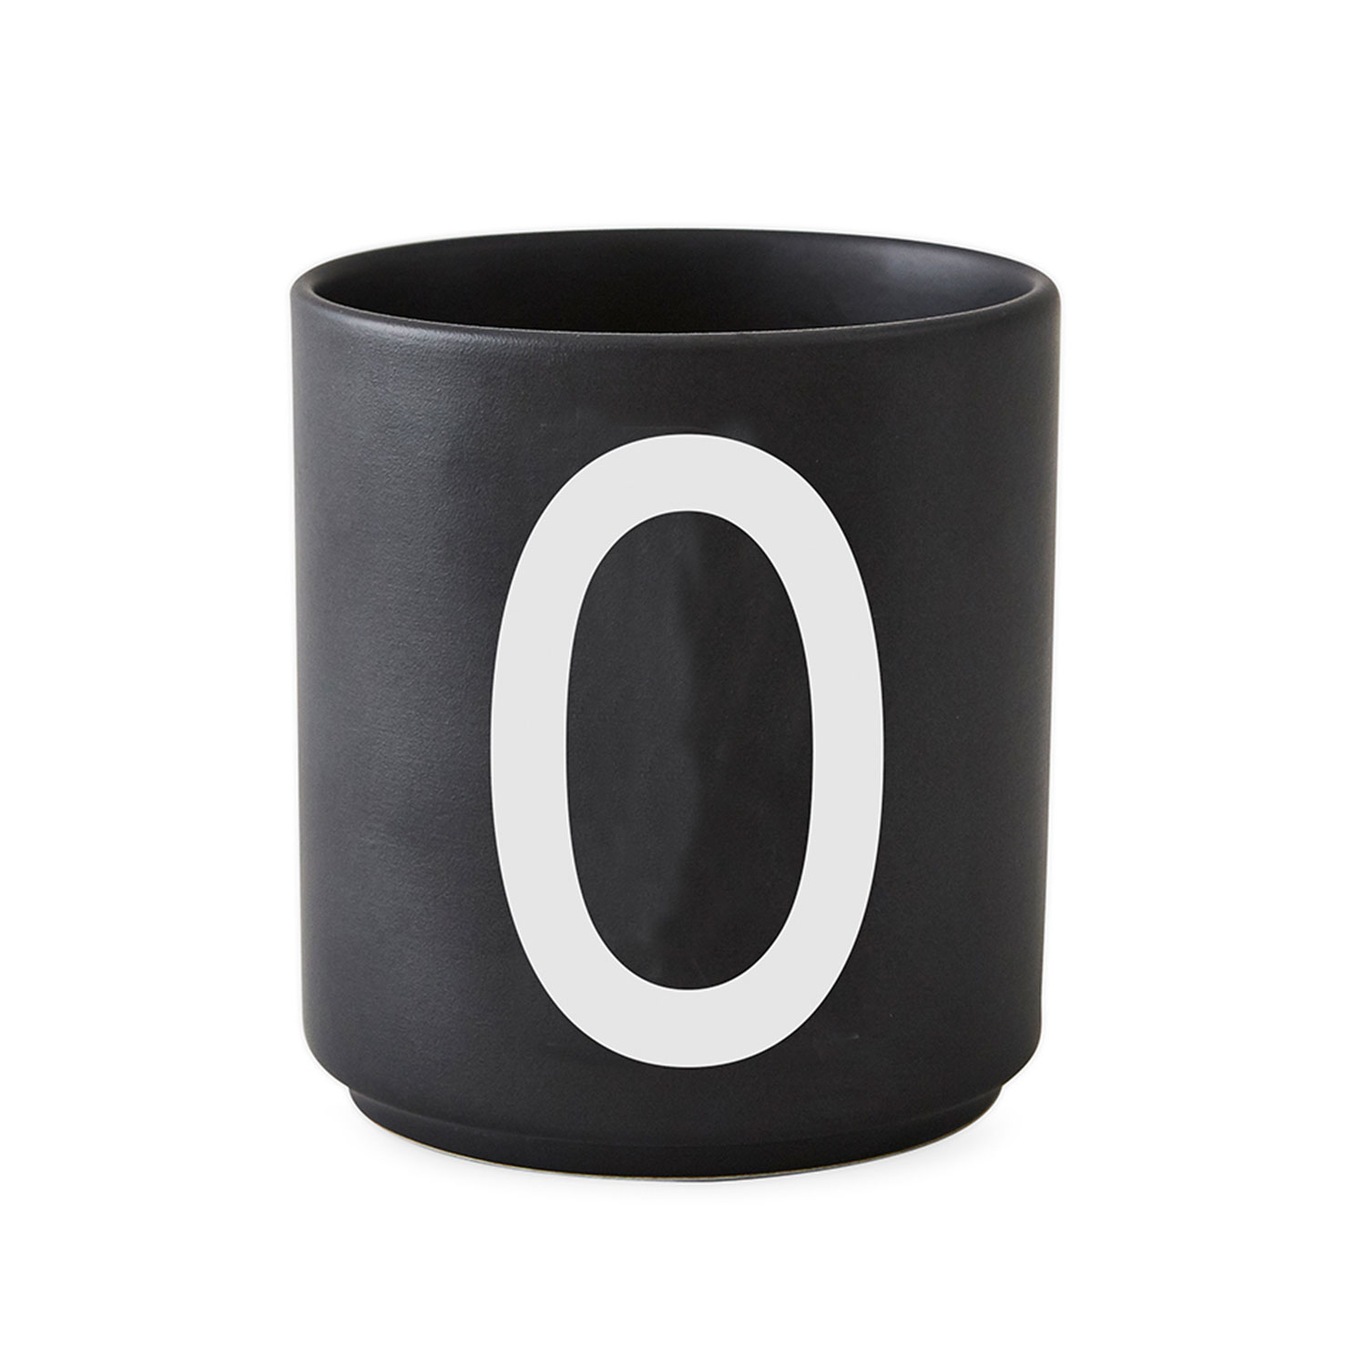 Personal Porcelain Cup Black, O